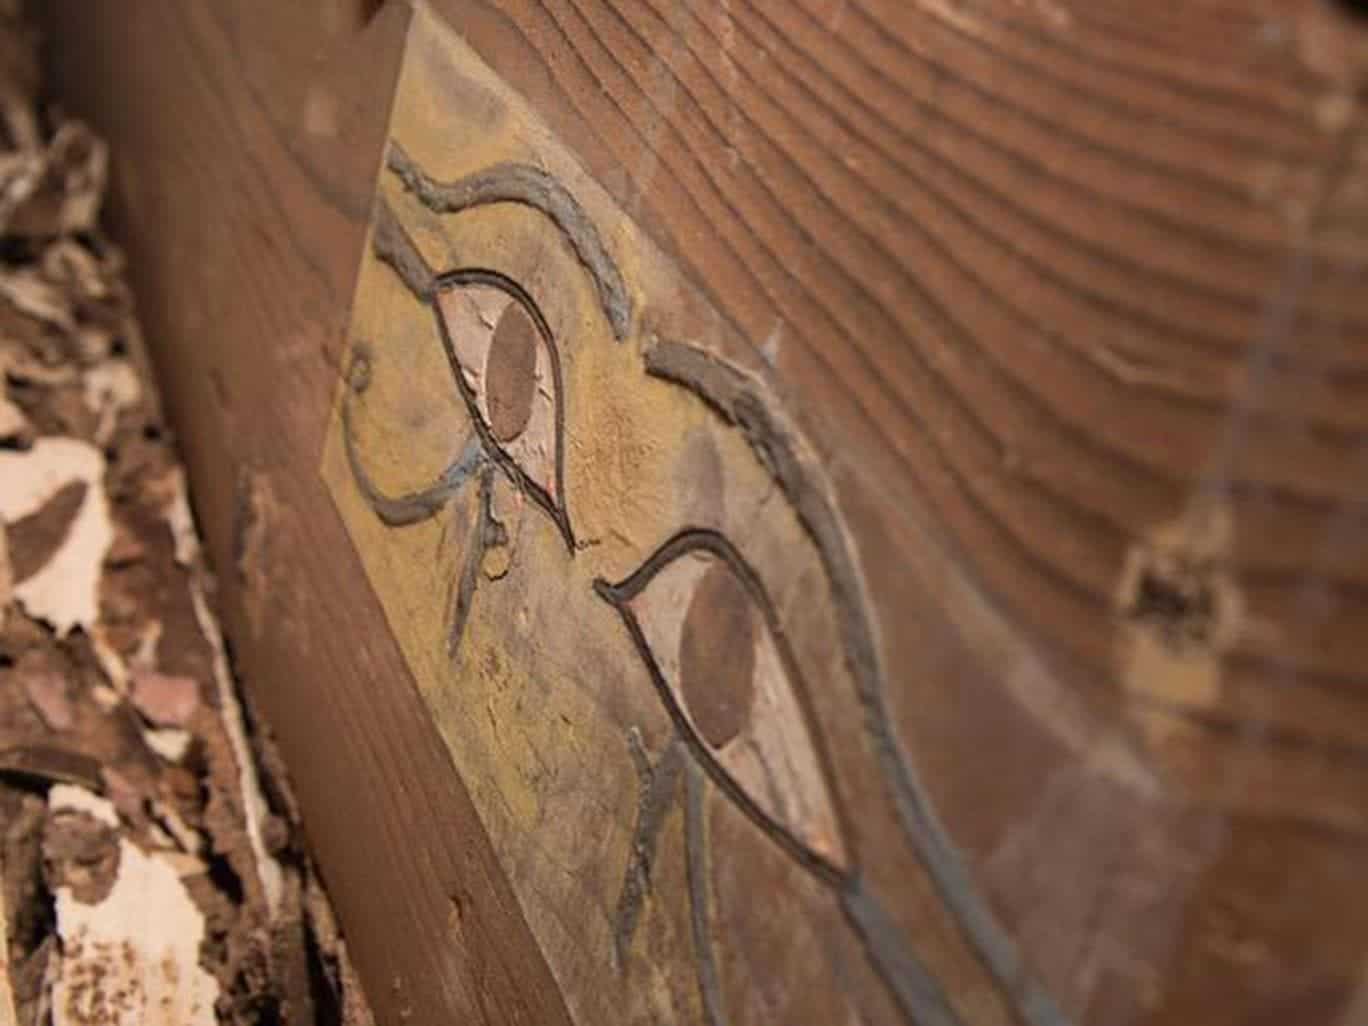 Paintng on the sarcophagus. A well preserved mummy was also found, covered with a polychrome cartonnage, collars and a mask. Image credits: Egypt's Ministry of Antiquities.